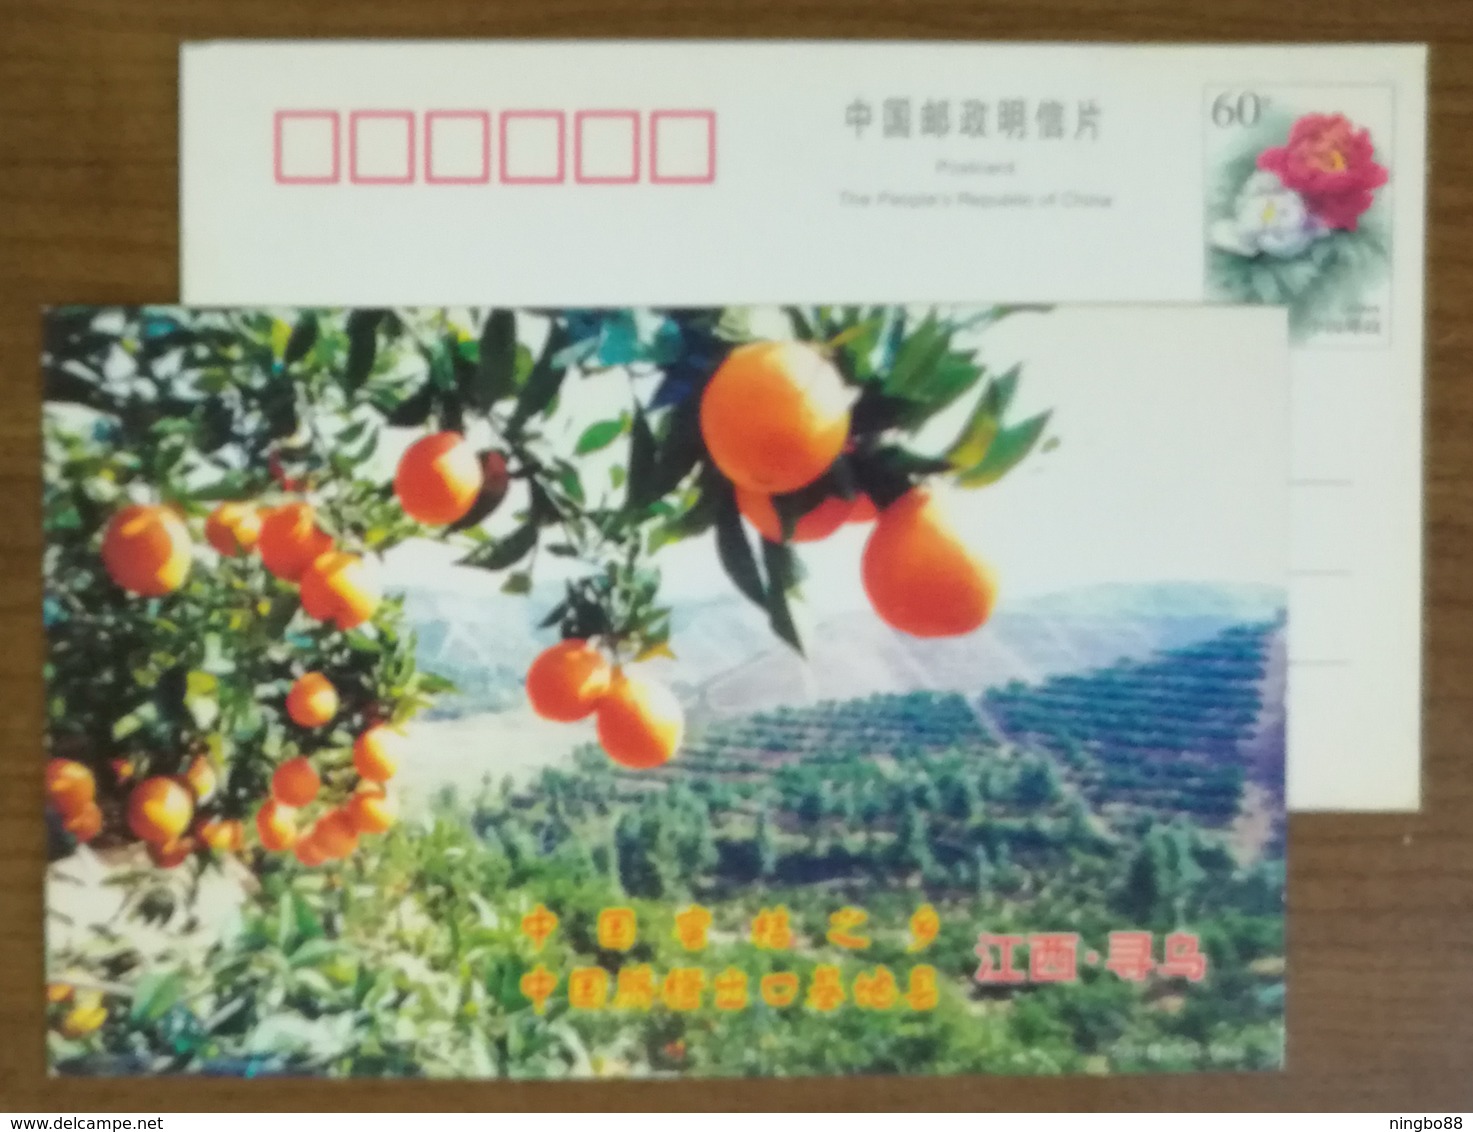 Hometown Of Sweet Citrus,China 2001 Xunwu The Expert Base County Of Navel Orange Advertising Pre-stamped Card - Fruits